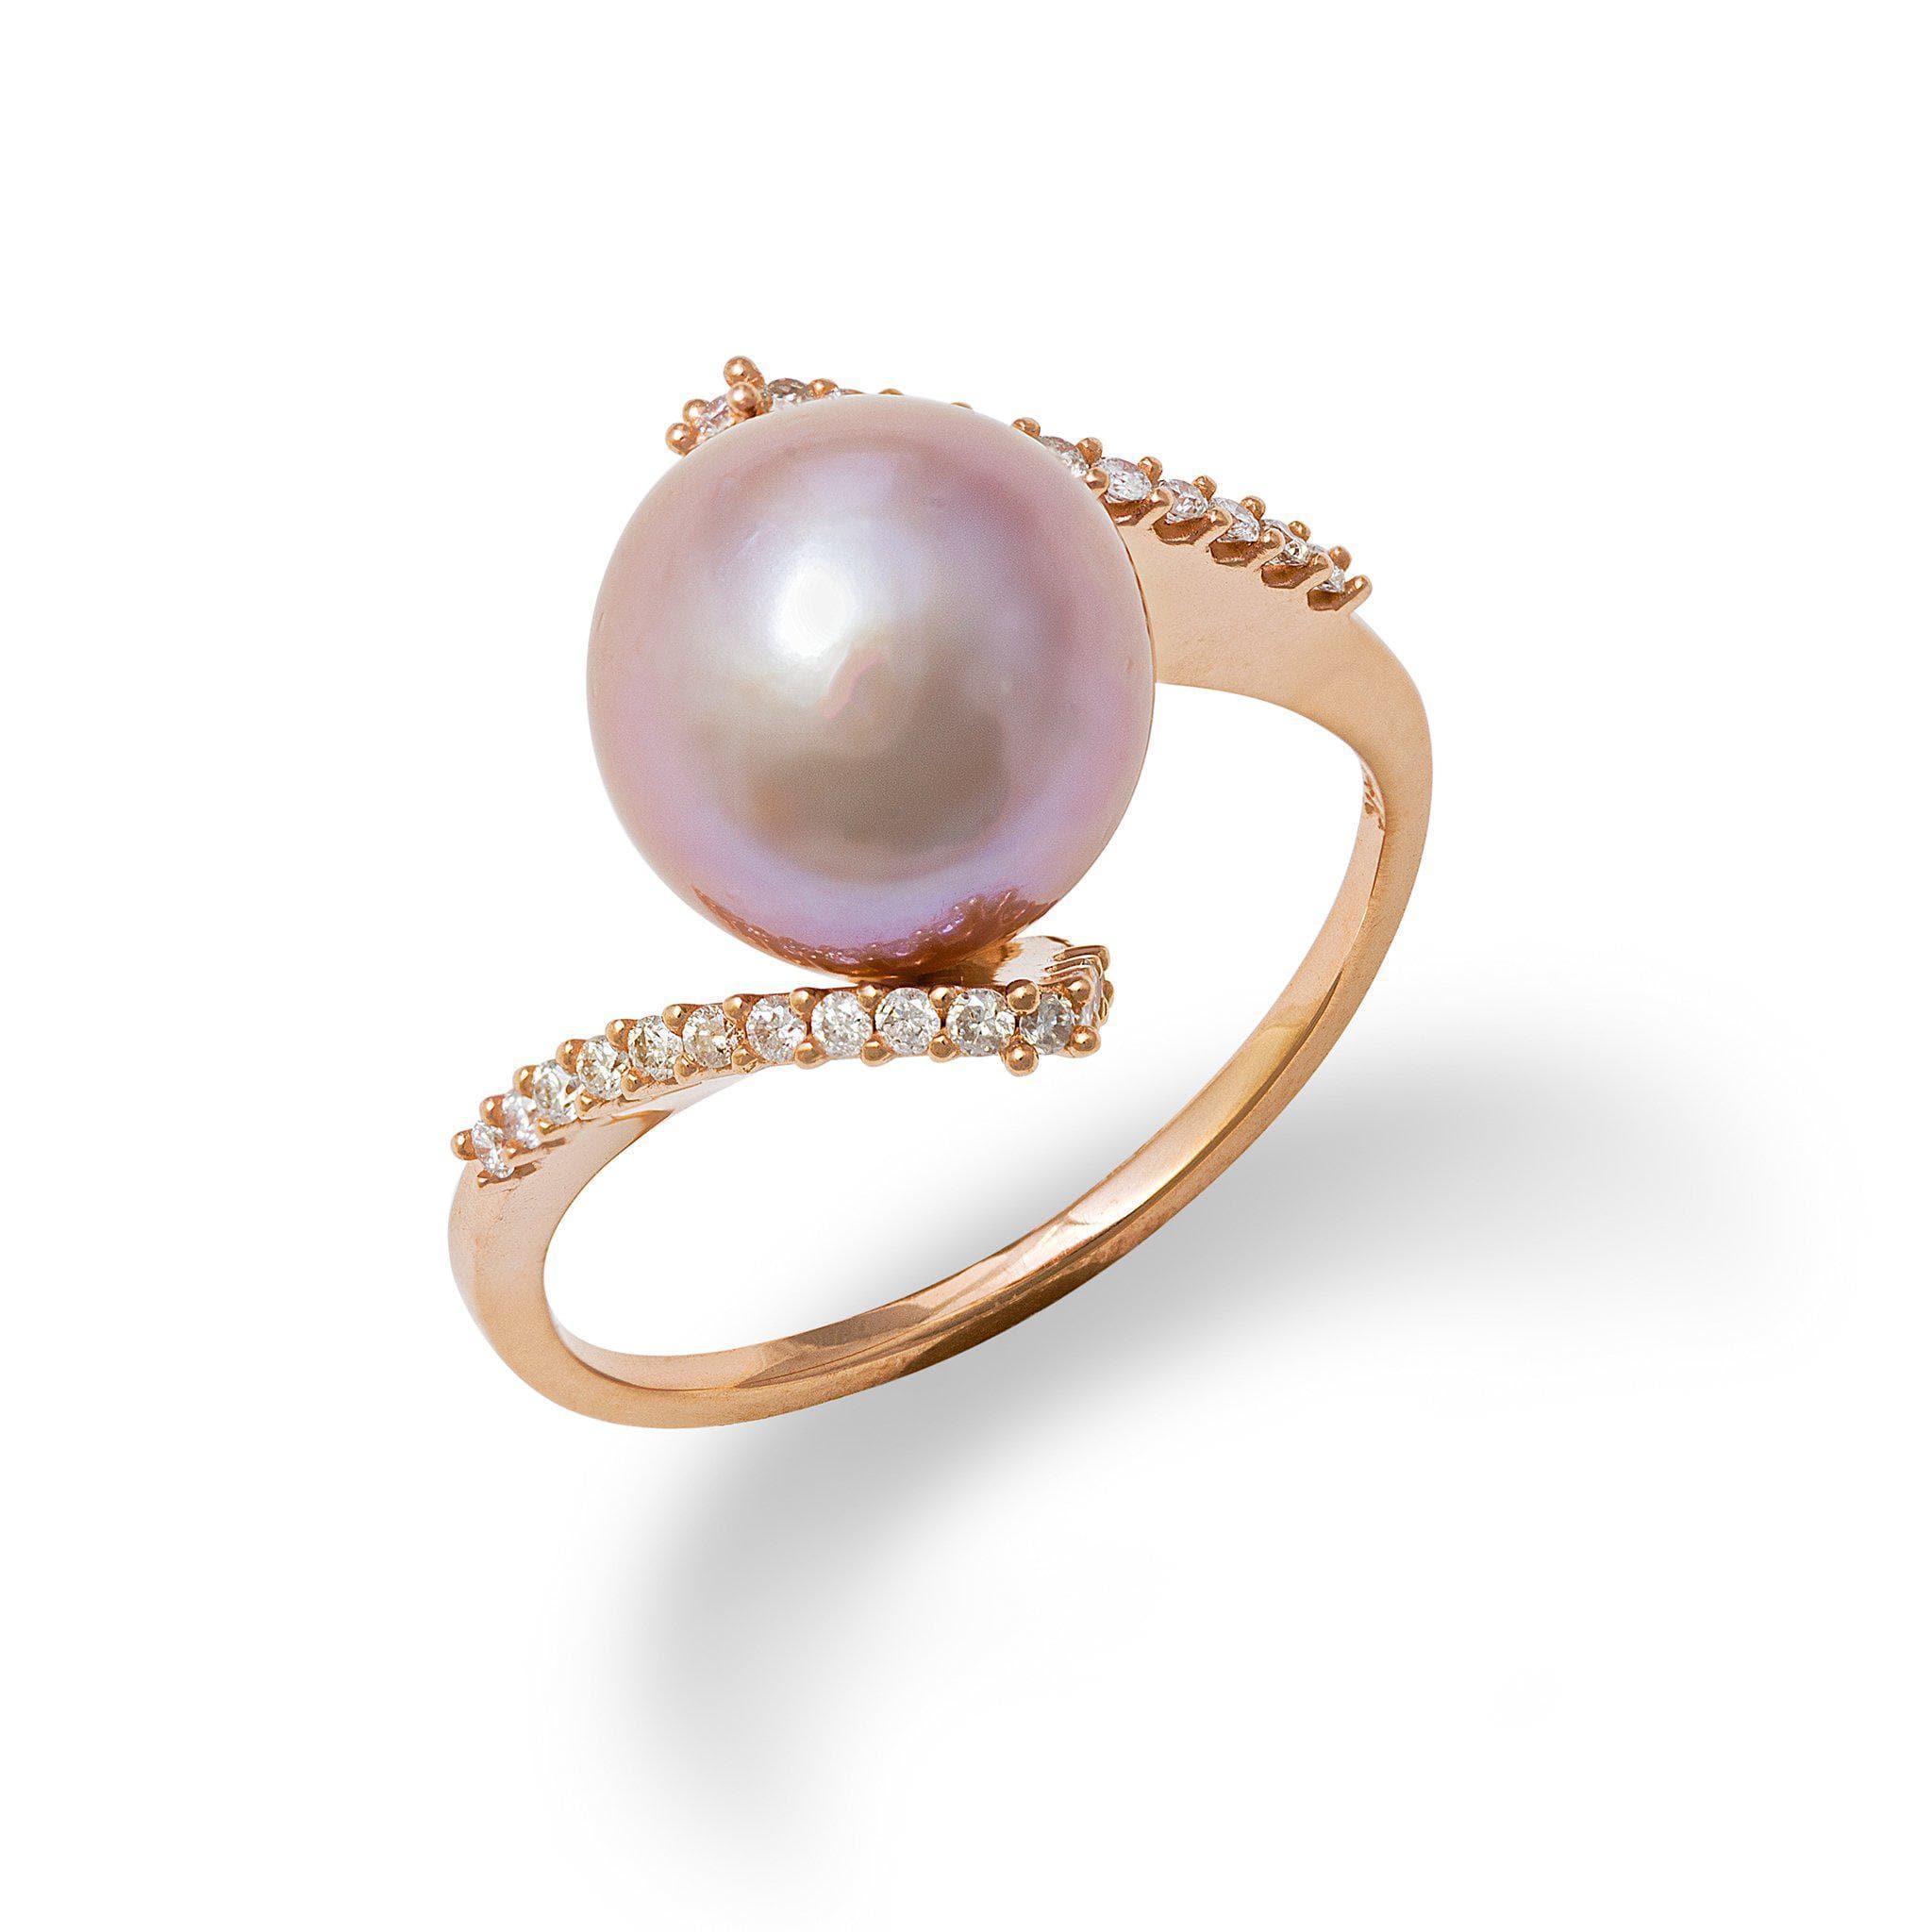 Lavender Freshwater Pearl Ring in Rose Gold with Diamonds